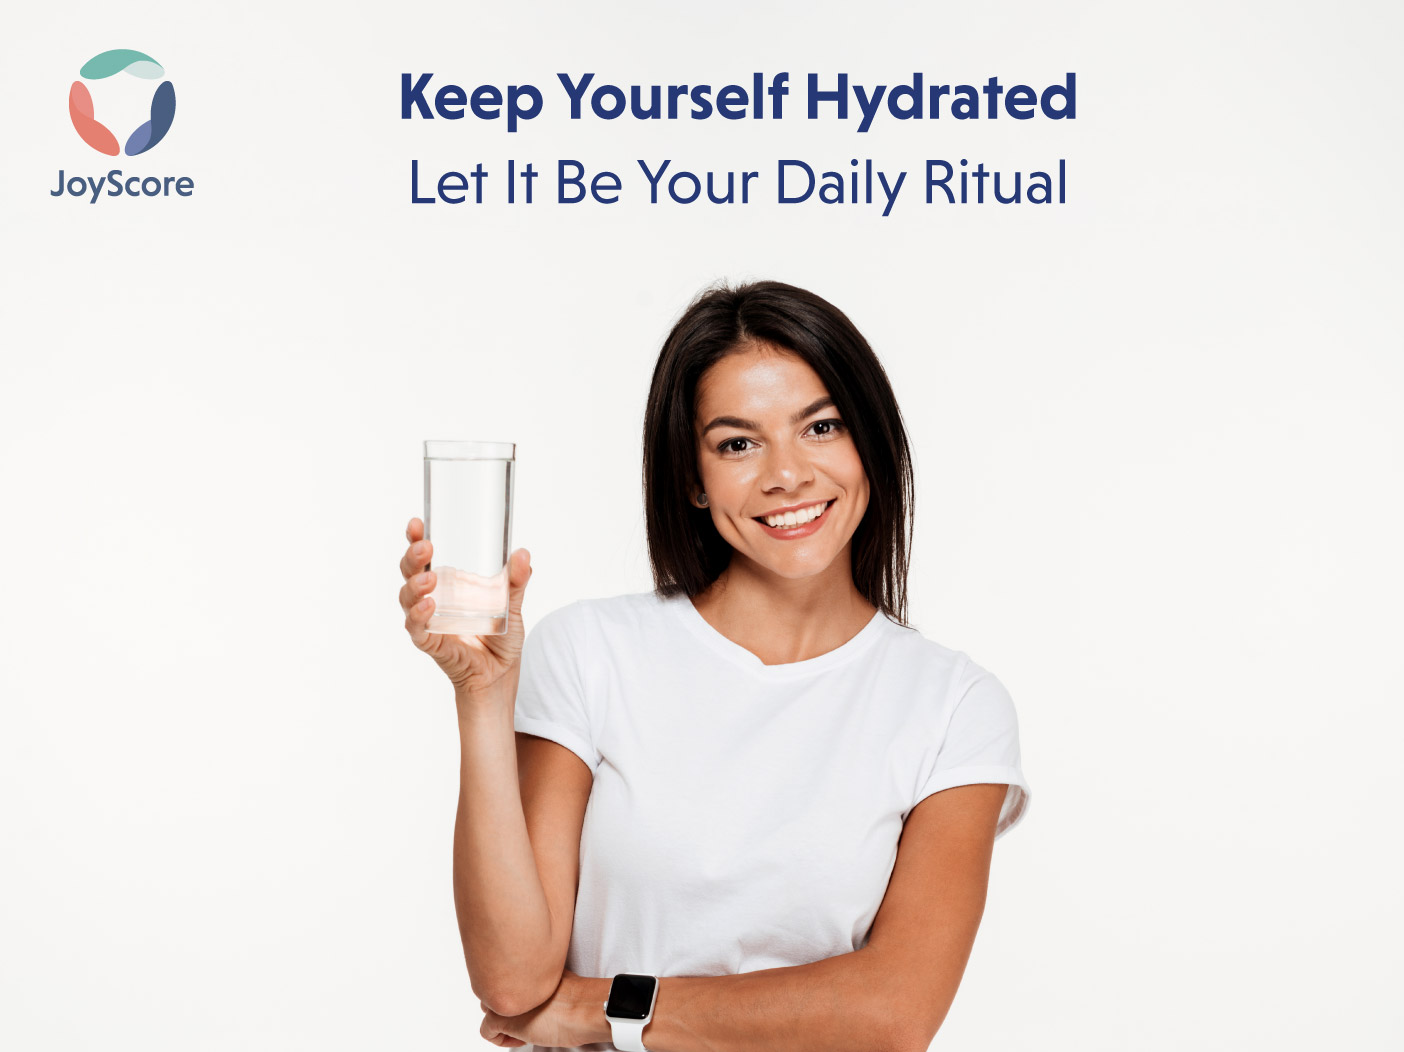 Keep Yourself Hydrated – Let IT Be Your Daily Ritual